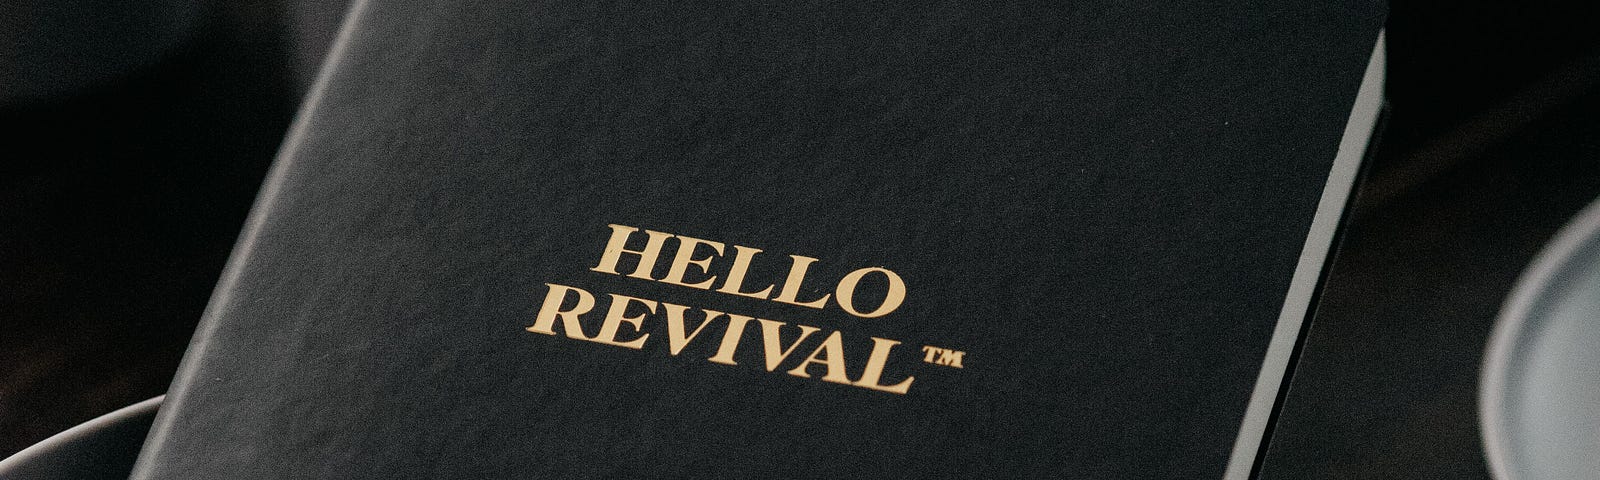 A black book titled “Hello Revival” sitting in a white ceramic bowl surrounded by white ceramic mugs and plates